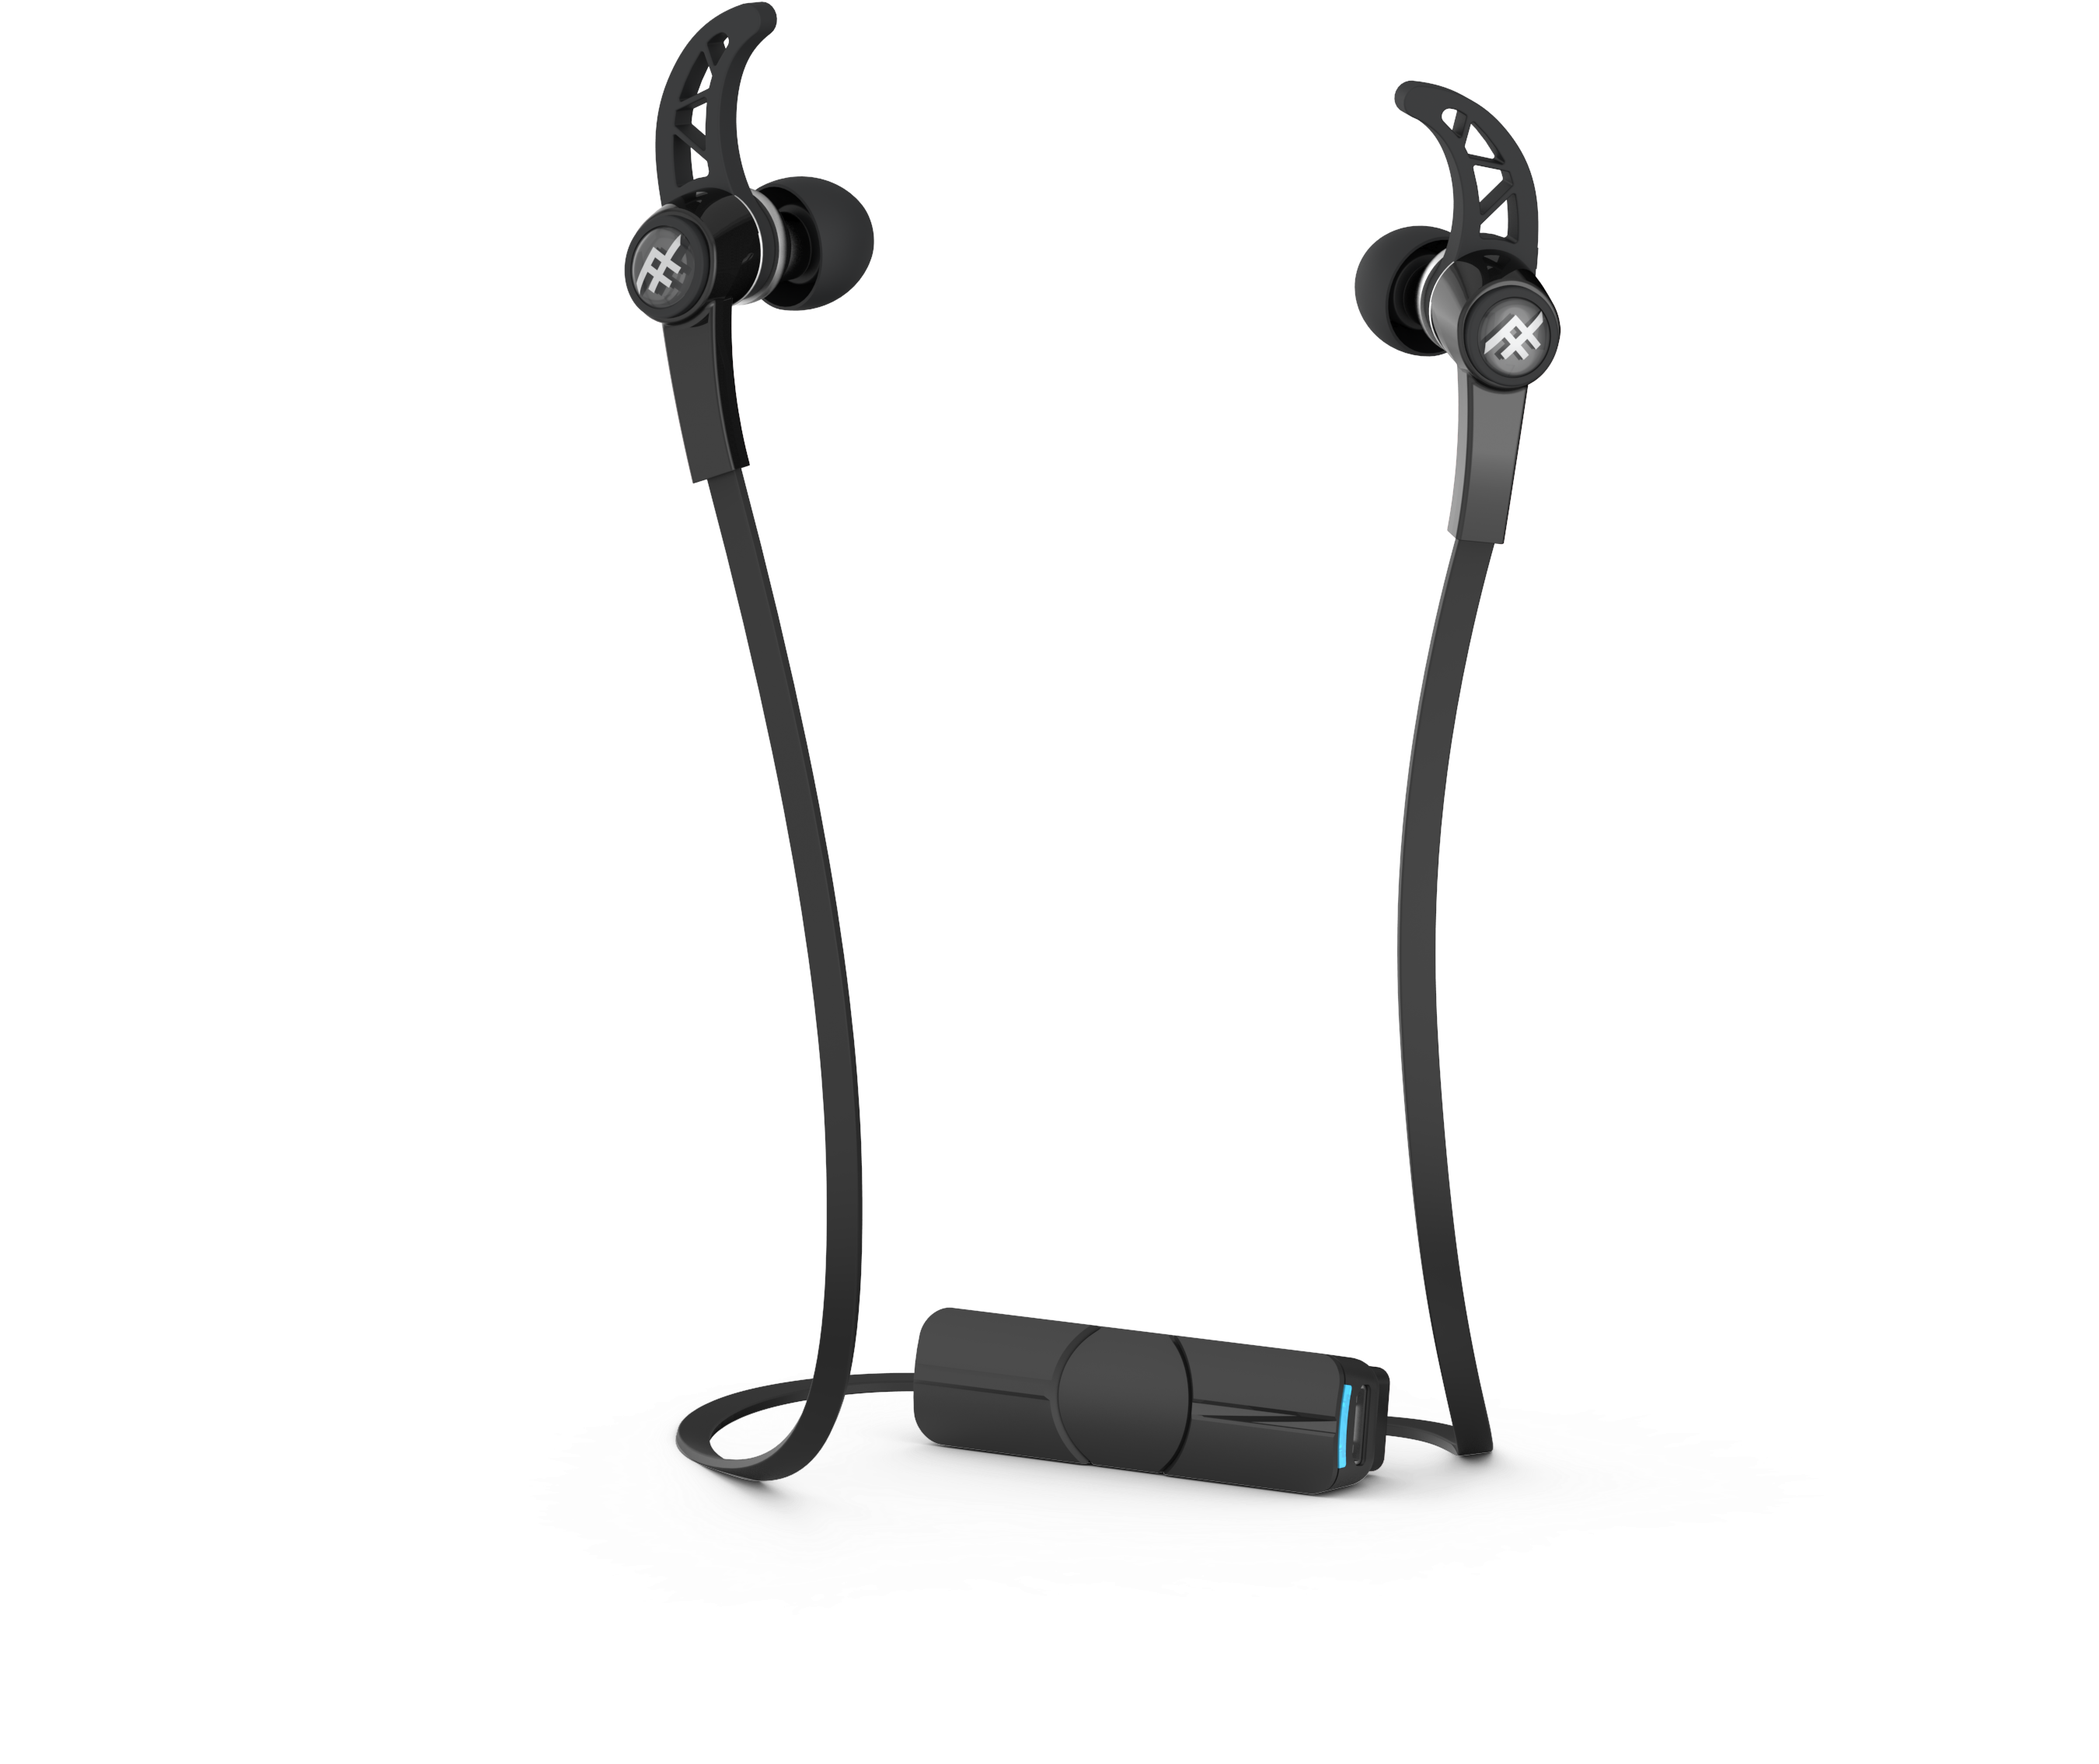 10067955 1 - Ifrogz Summit Wireless Earbuds Black (2700x2700), Png Download